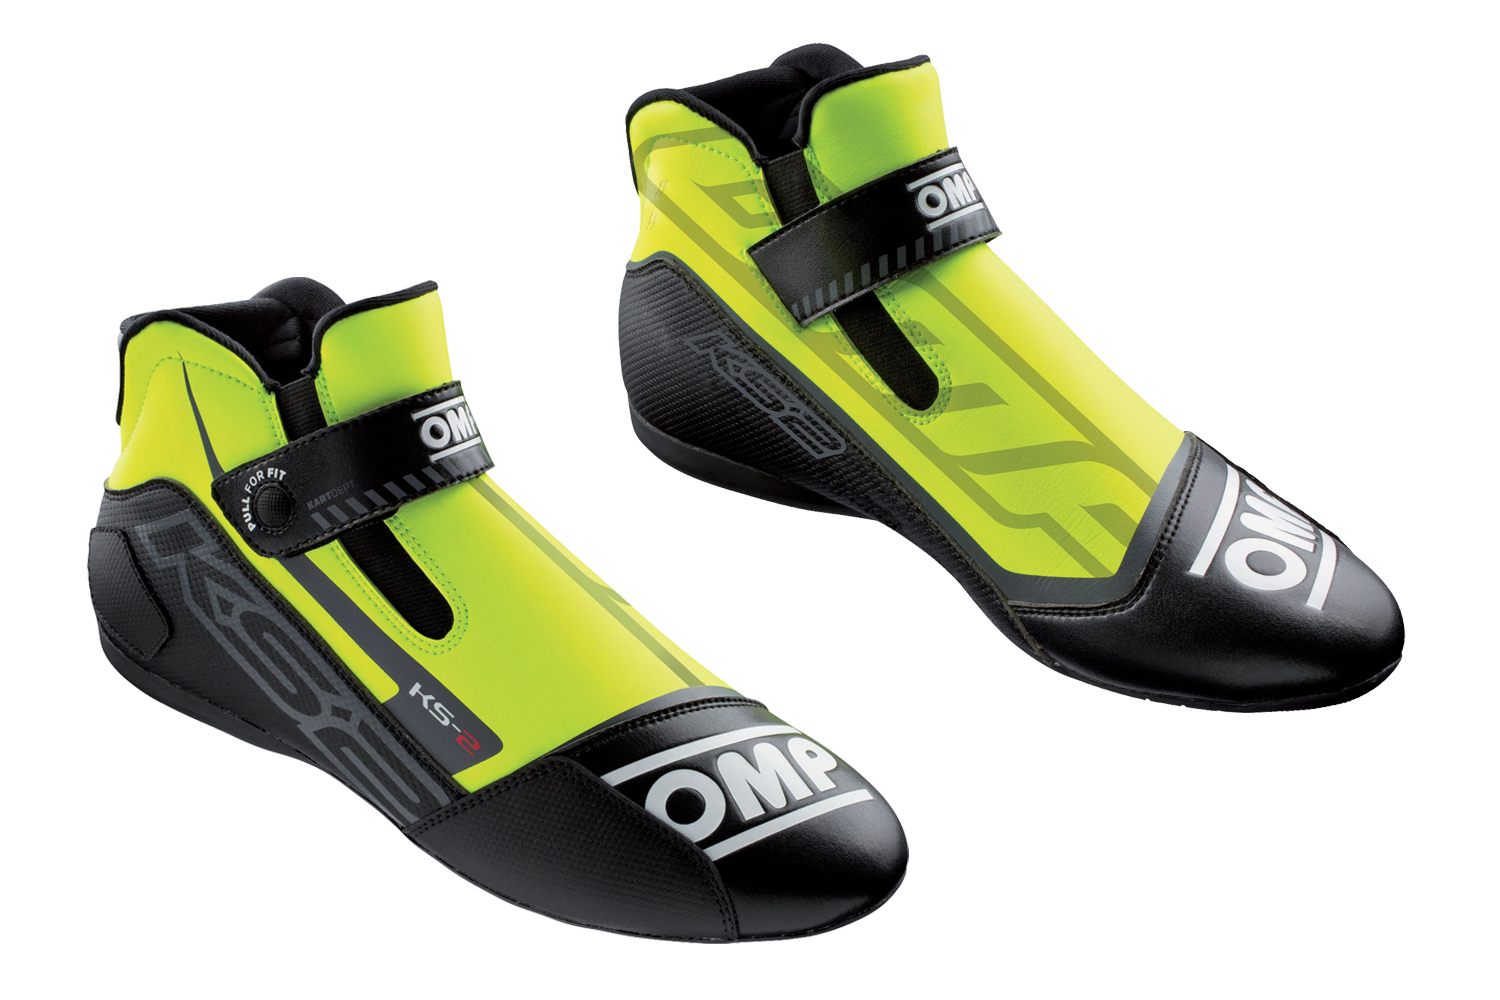 OMP Racing IC82505947 Driving Shoe, KS-2, Mid-Top, FIA Approved, Suede Leather Outer, Fire Retardant Fabric Inner, Fluorescent Yellow / Black, Euro Size 47, Pair